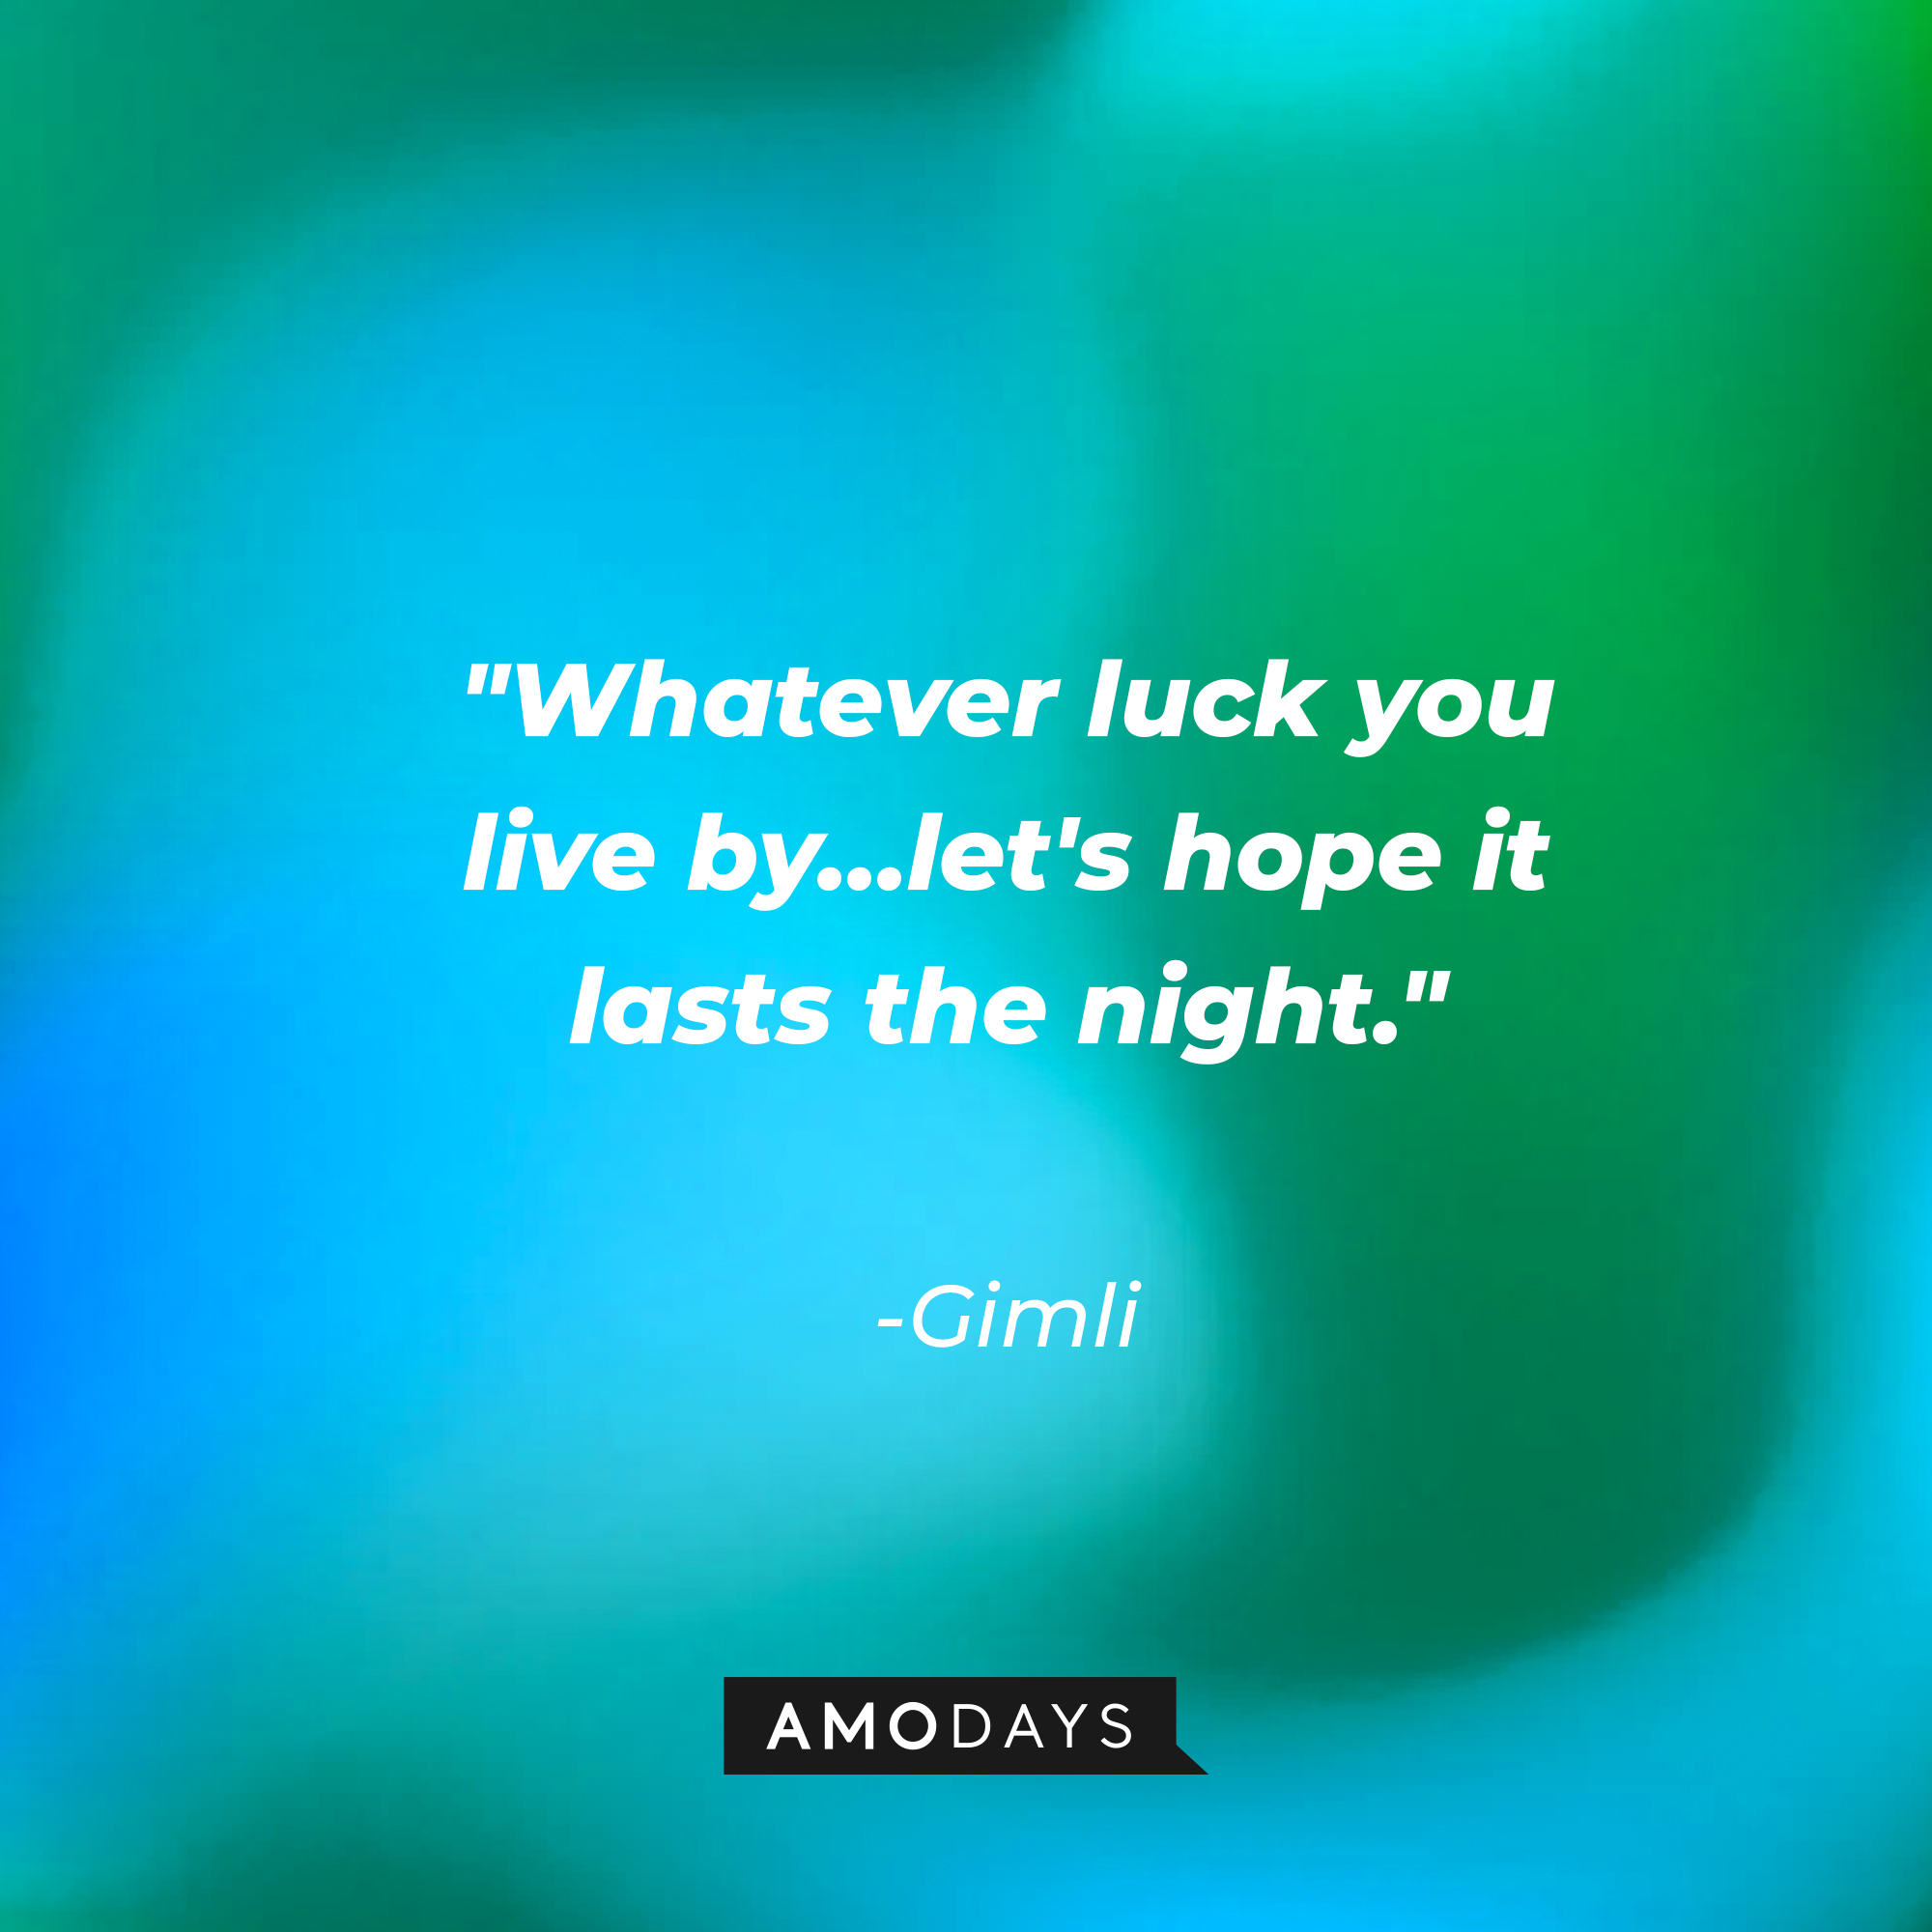 Gimli's quote: "Whatever luck you live by…let's hope it lasts the night." | Source: AmoDays